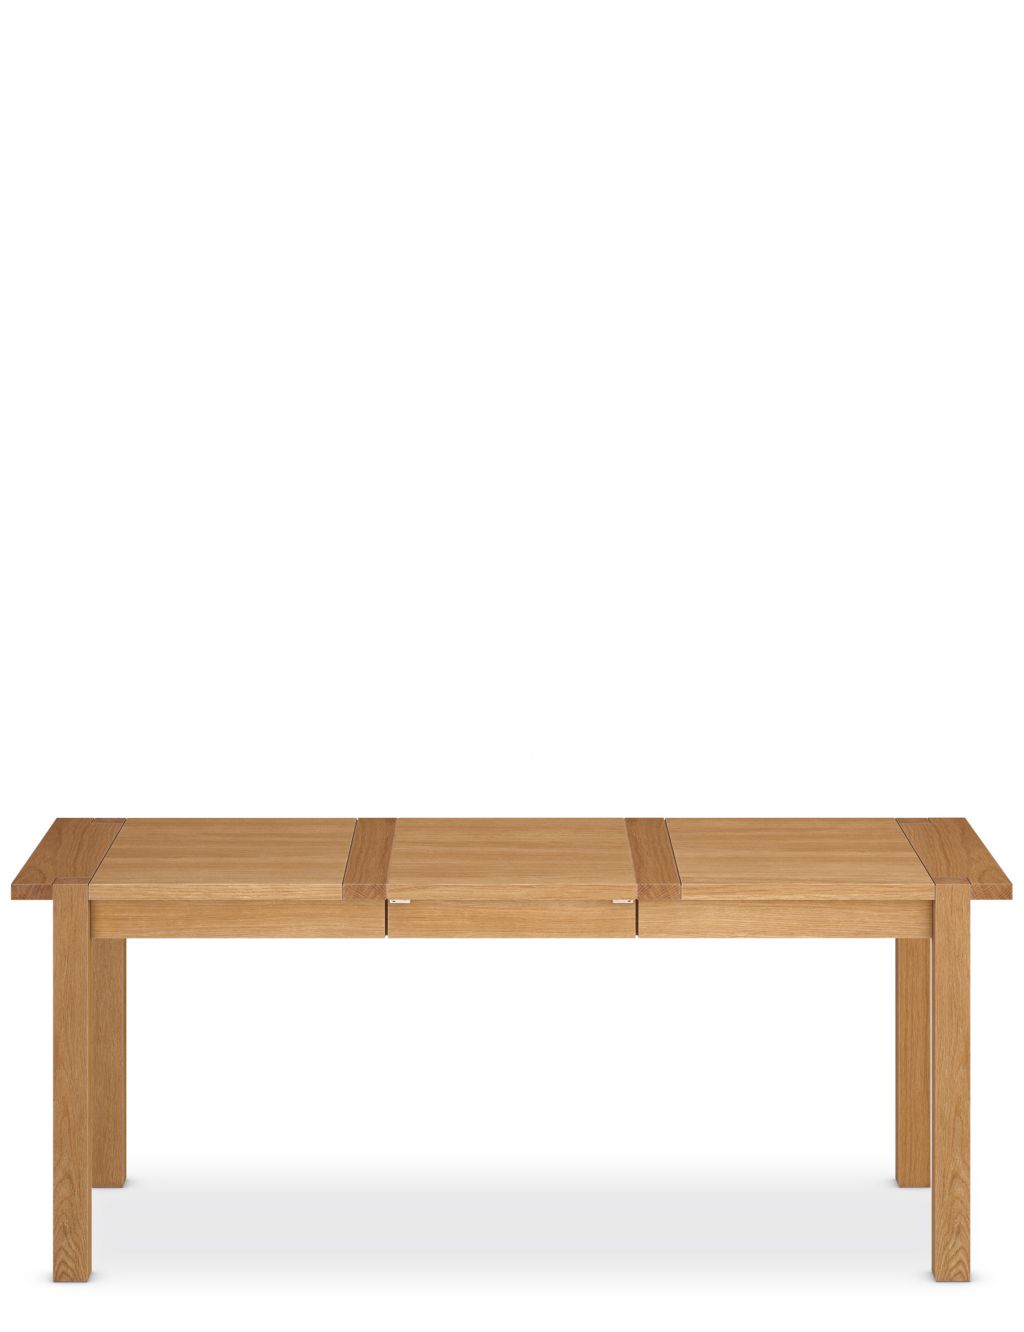 Sonoma™ 6-8 Seater Extending Dining Table image 2